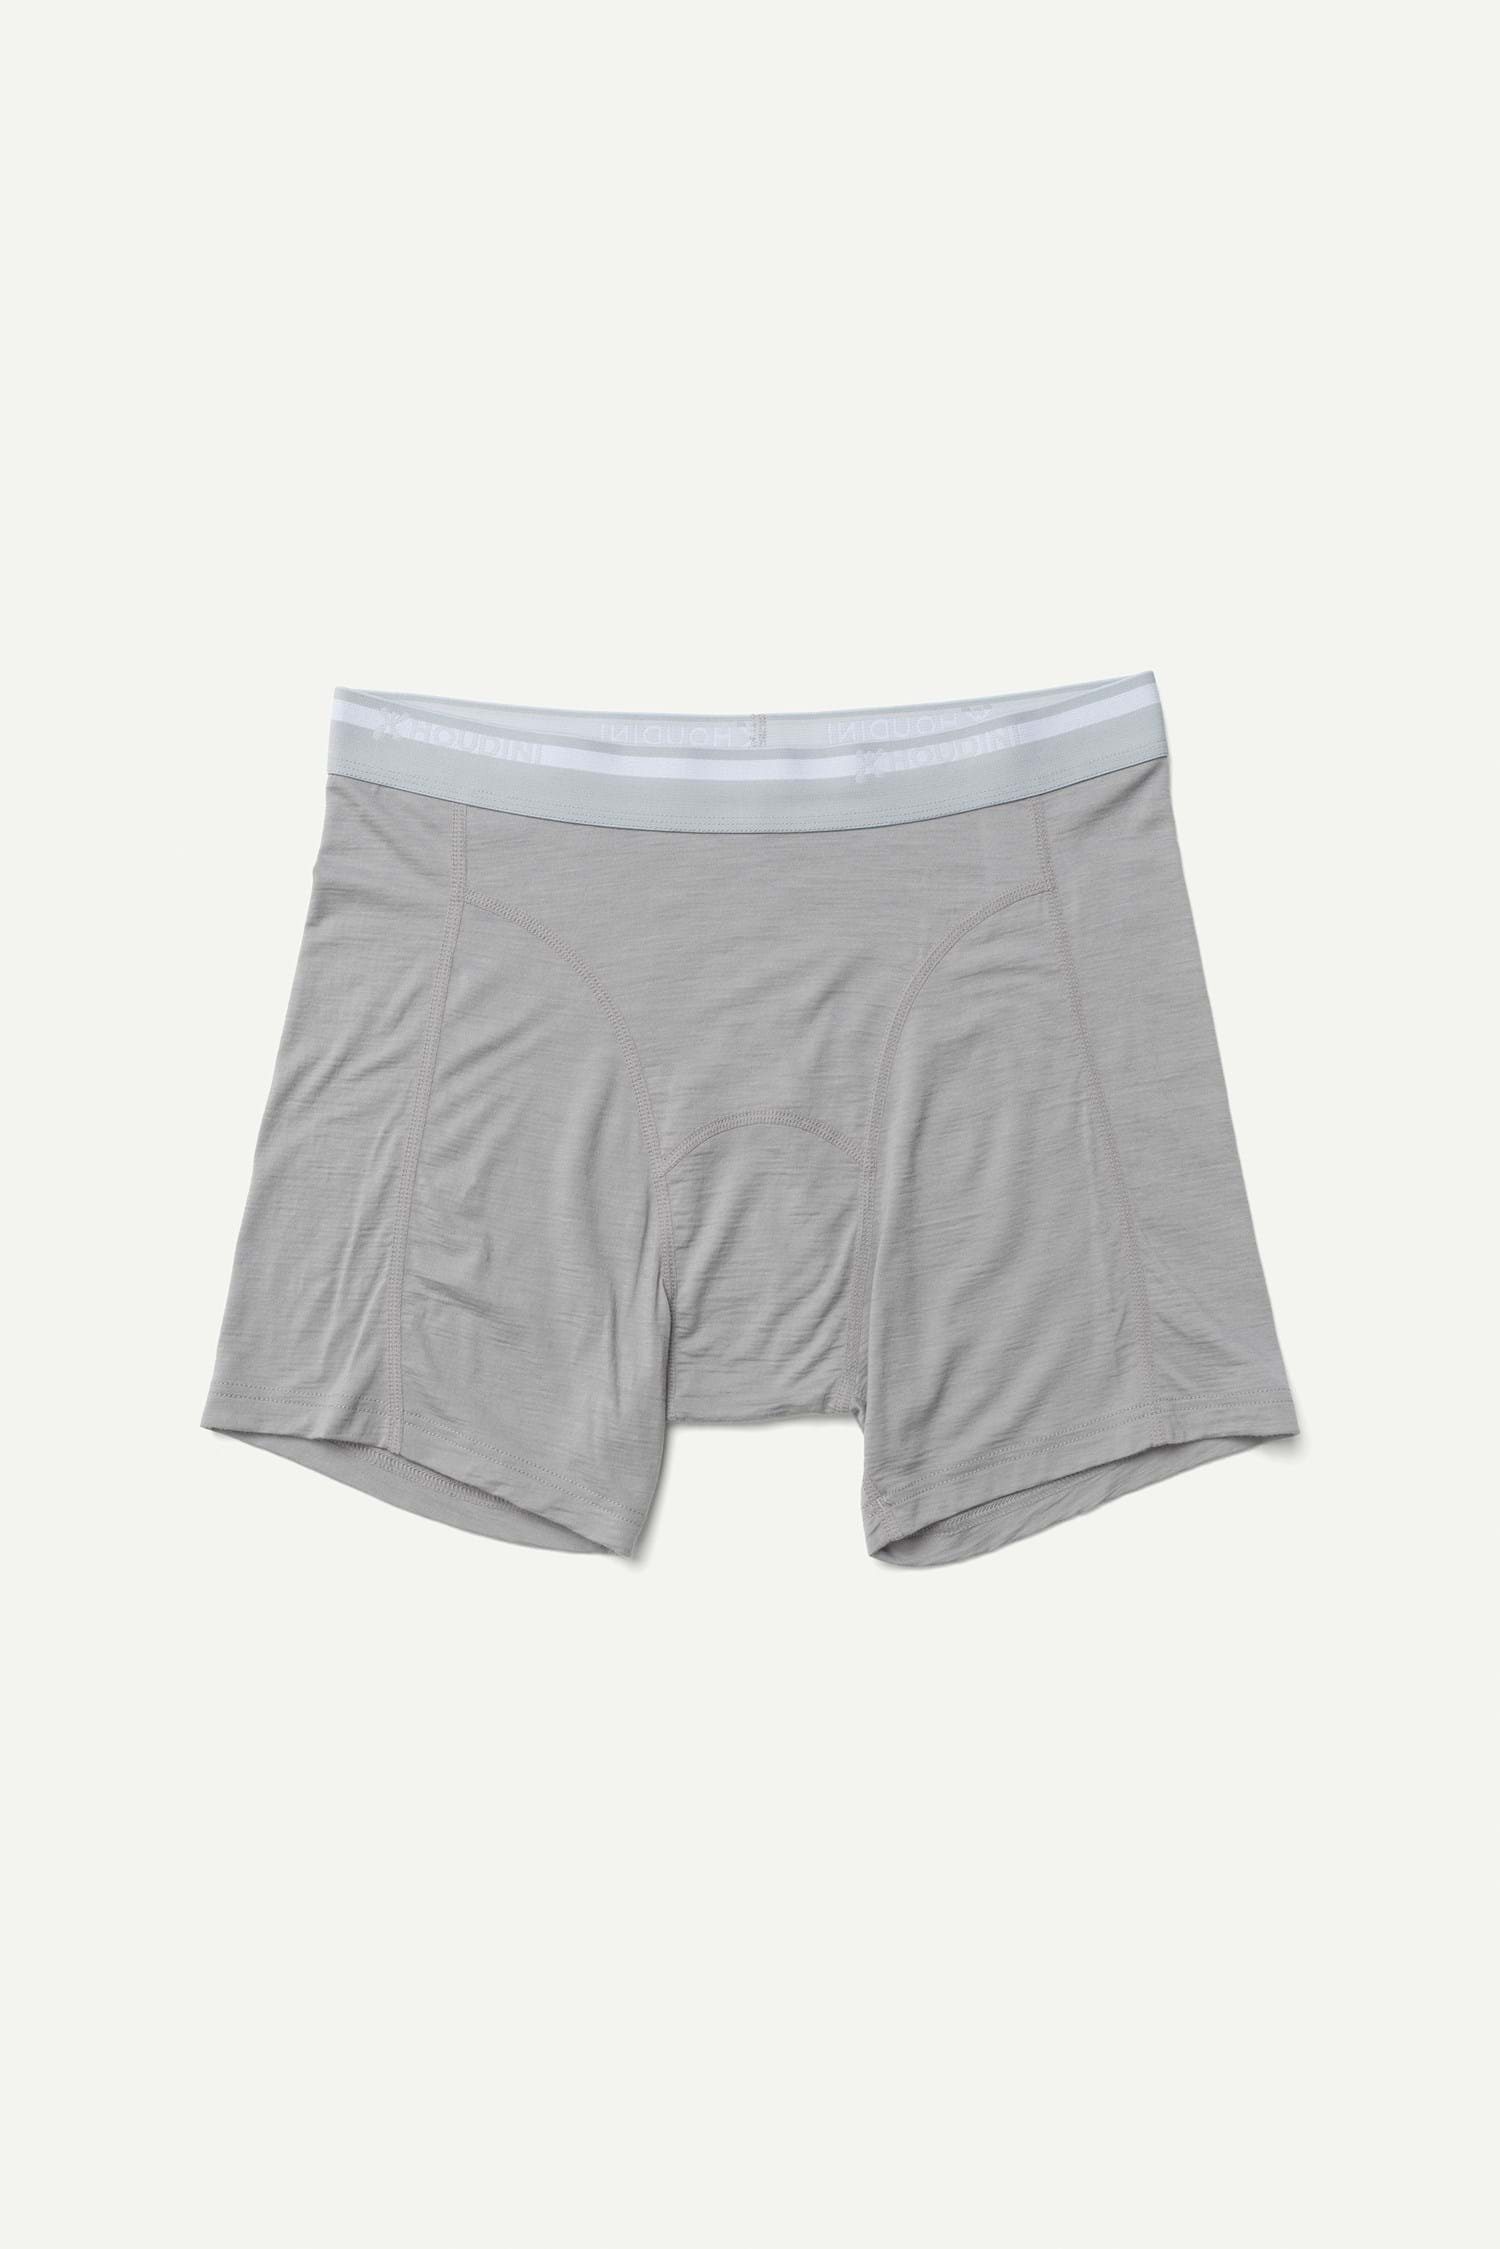 Houdini Funktionstights M's Desoli Boxers Cloudy Gray